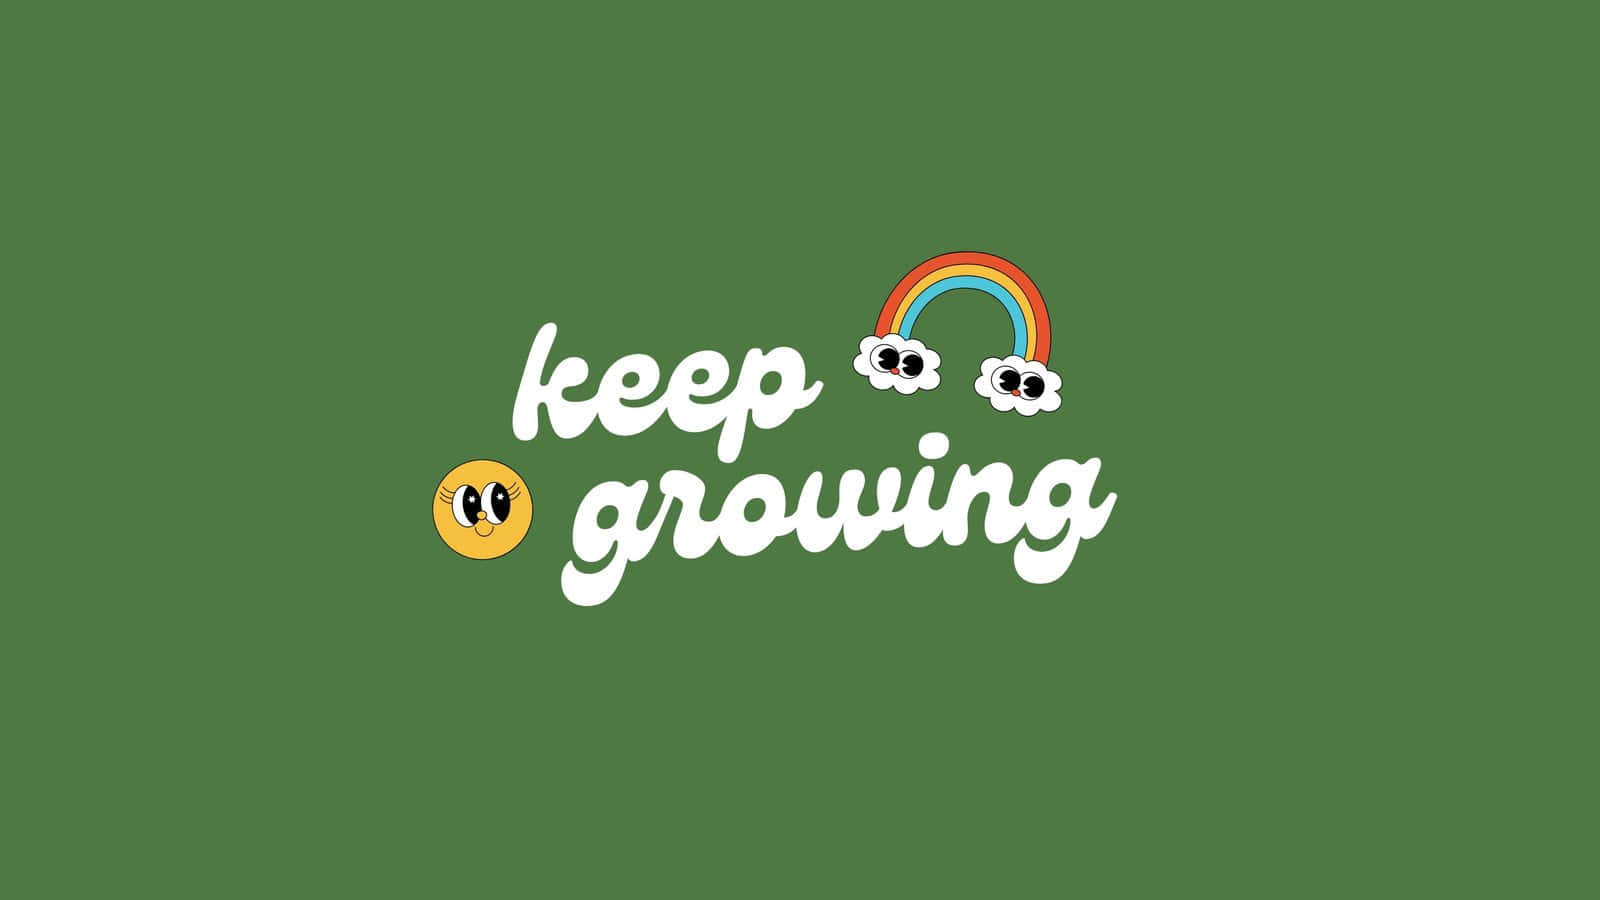 Keep Growing Logo With A Rainbow And A Smiley Face Wallpaper